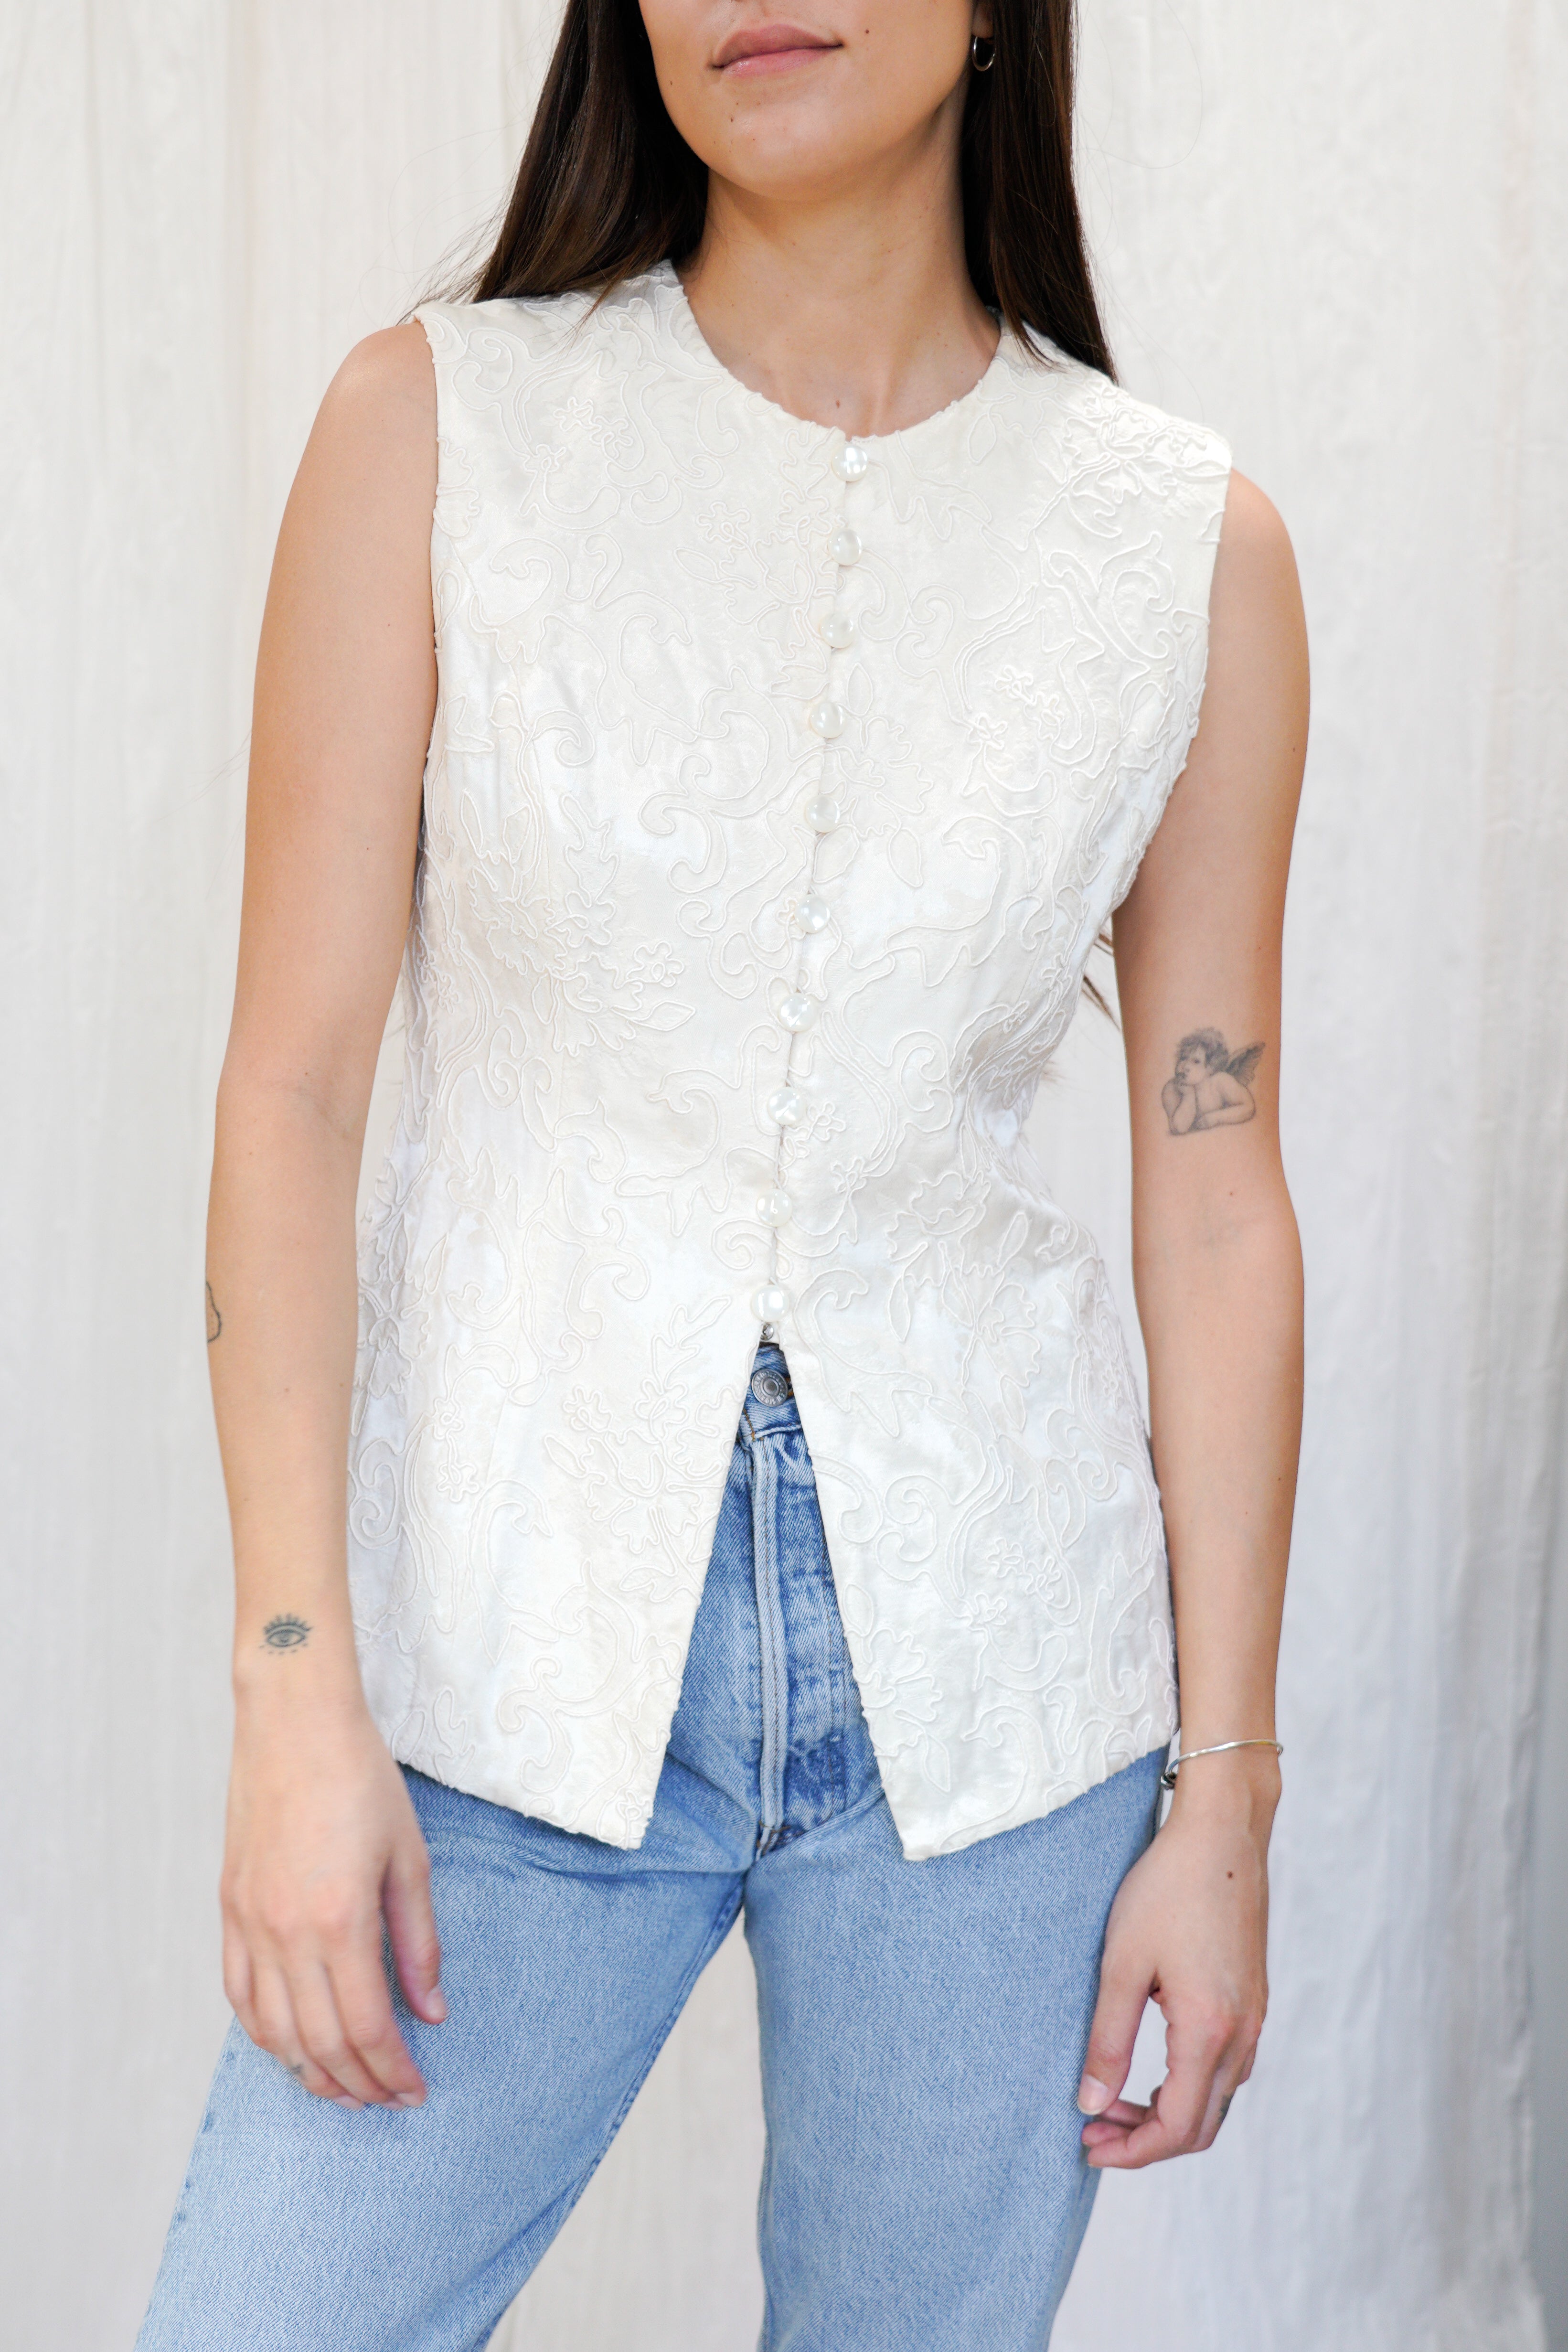 VINTAGE 1980-1990s Soutache Embroidered Sleeveless Top